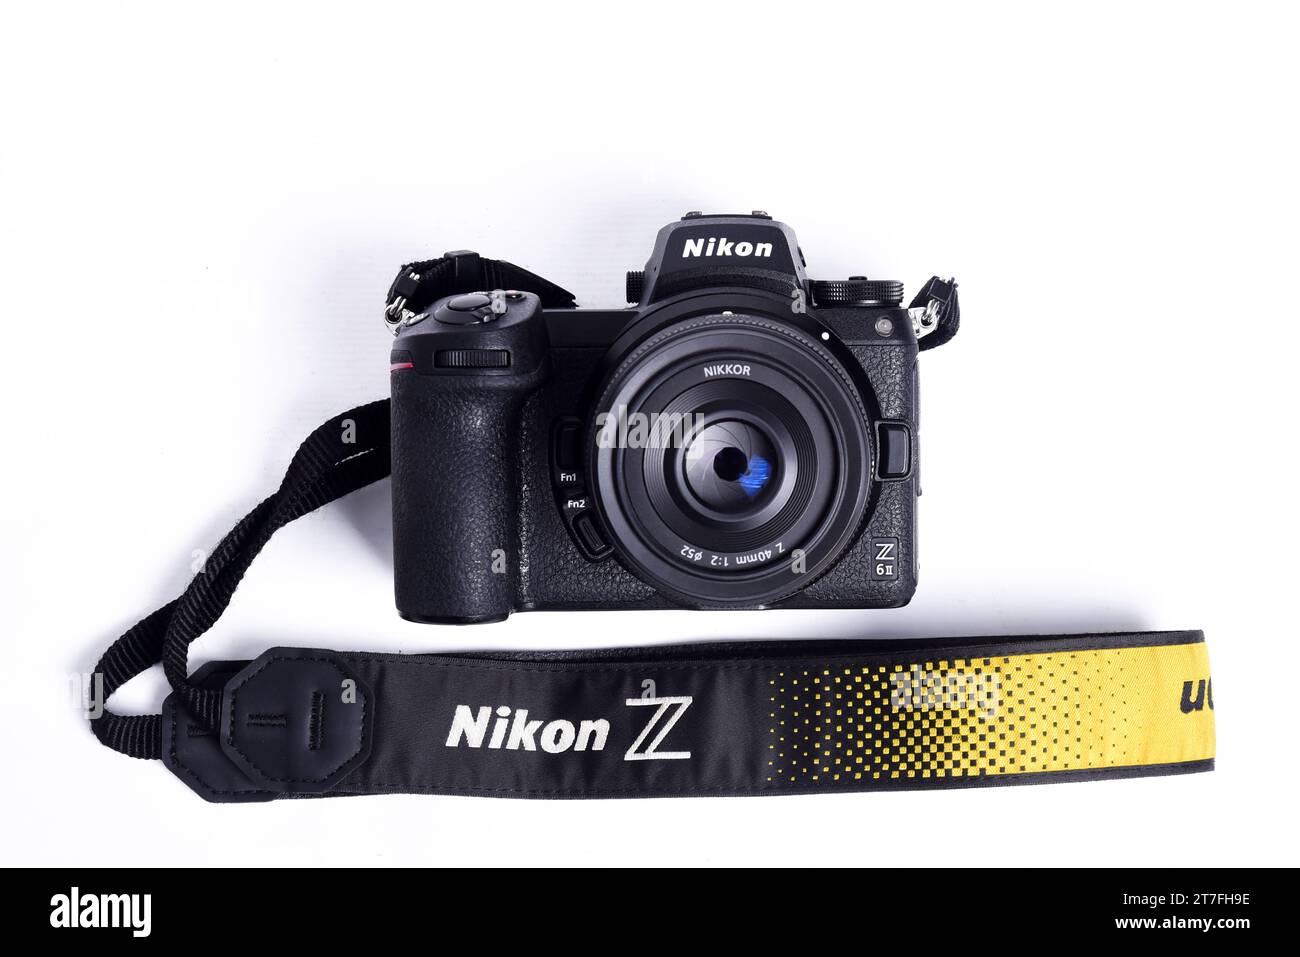 Nikon Z6 II (version 2) camera photograph confrontation and competition between cameras. White background. The best mirrorless cameras from top brands Stock Photo